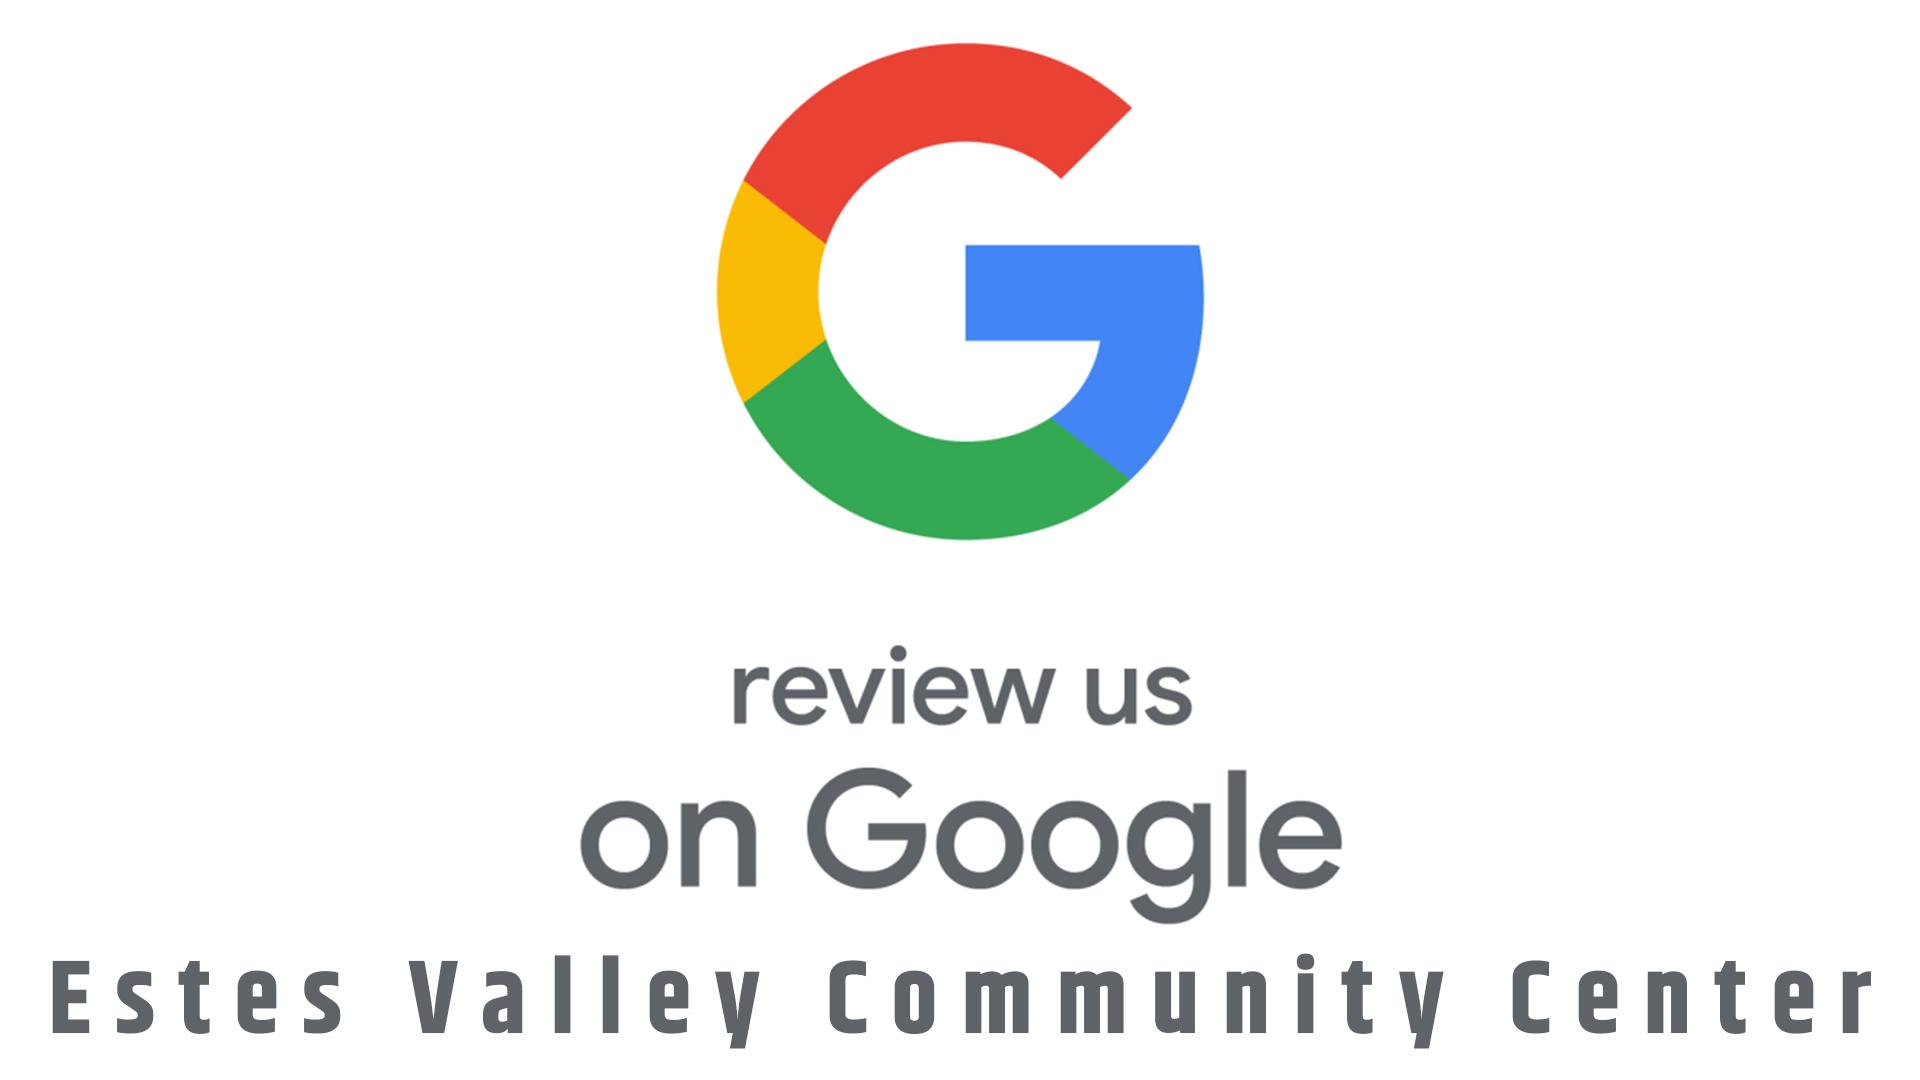 Give us a great Google Review!